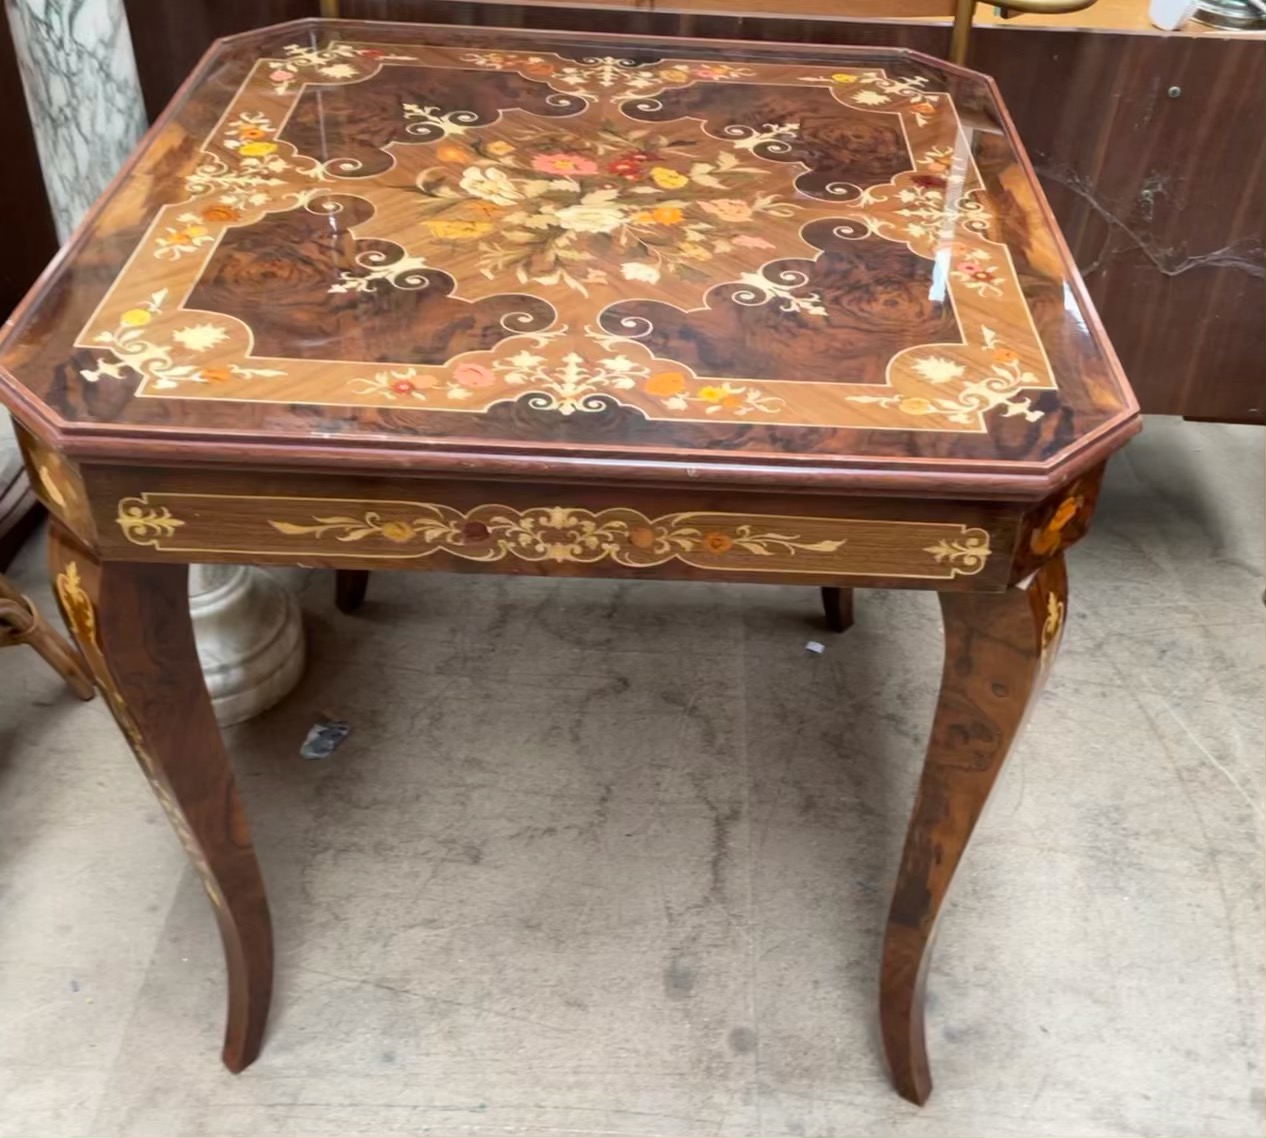 An inlaid Italian games table, with a removable top, revealing a backgammon board, chess board,